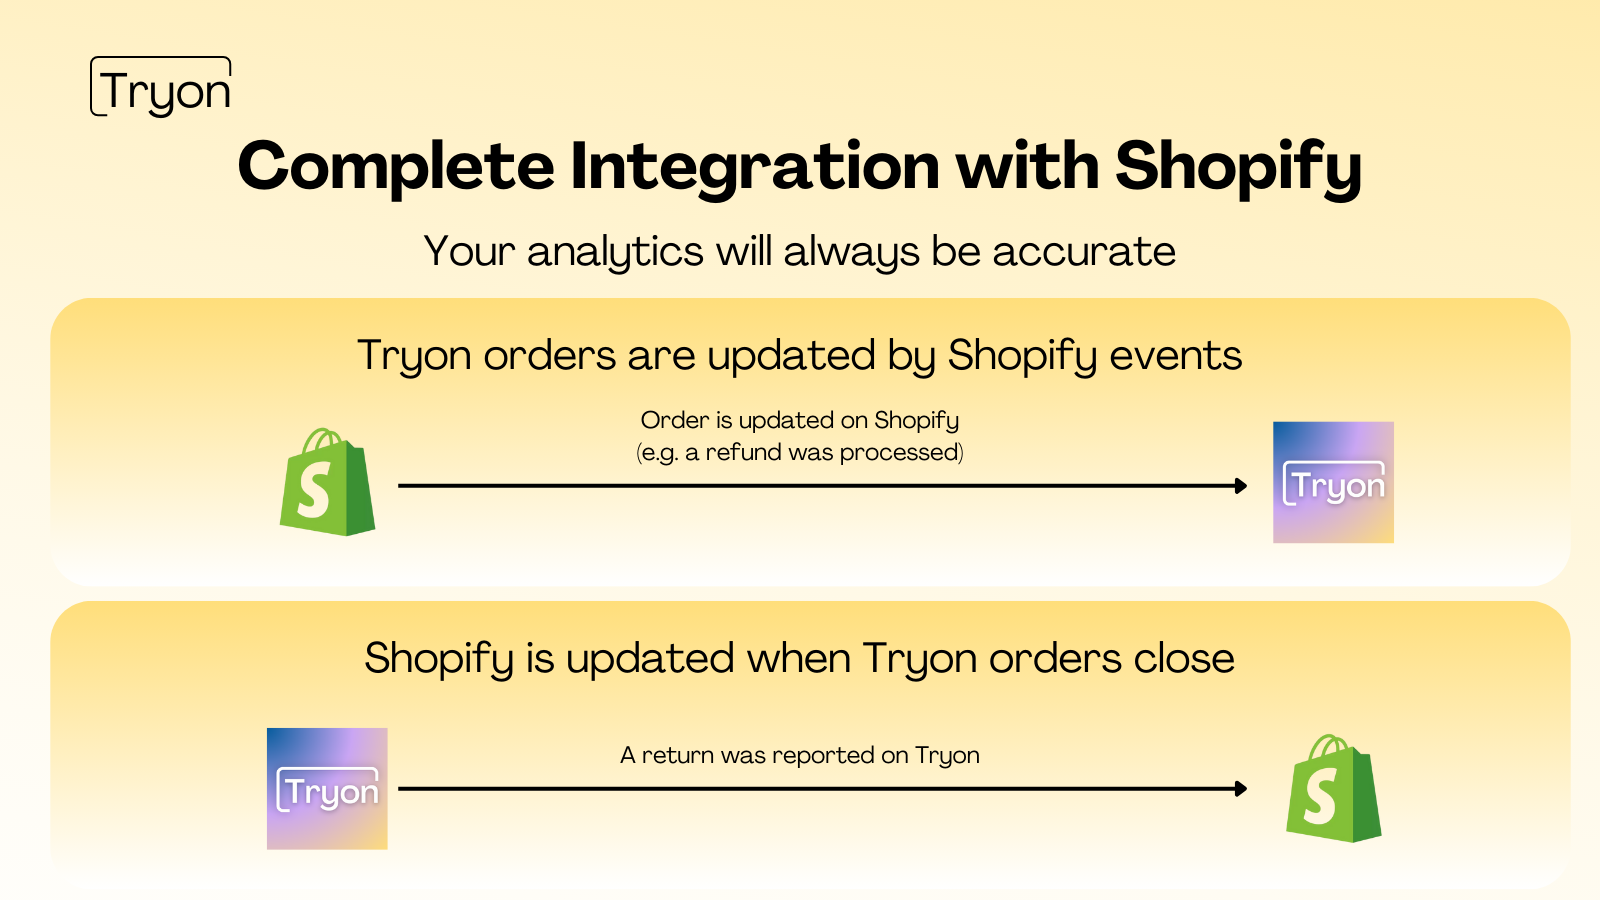 Complete Integration with Shopify